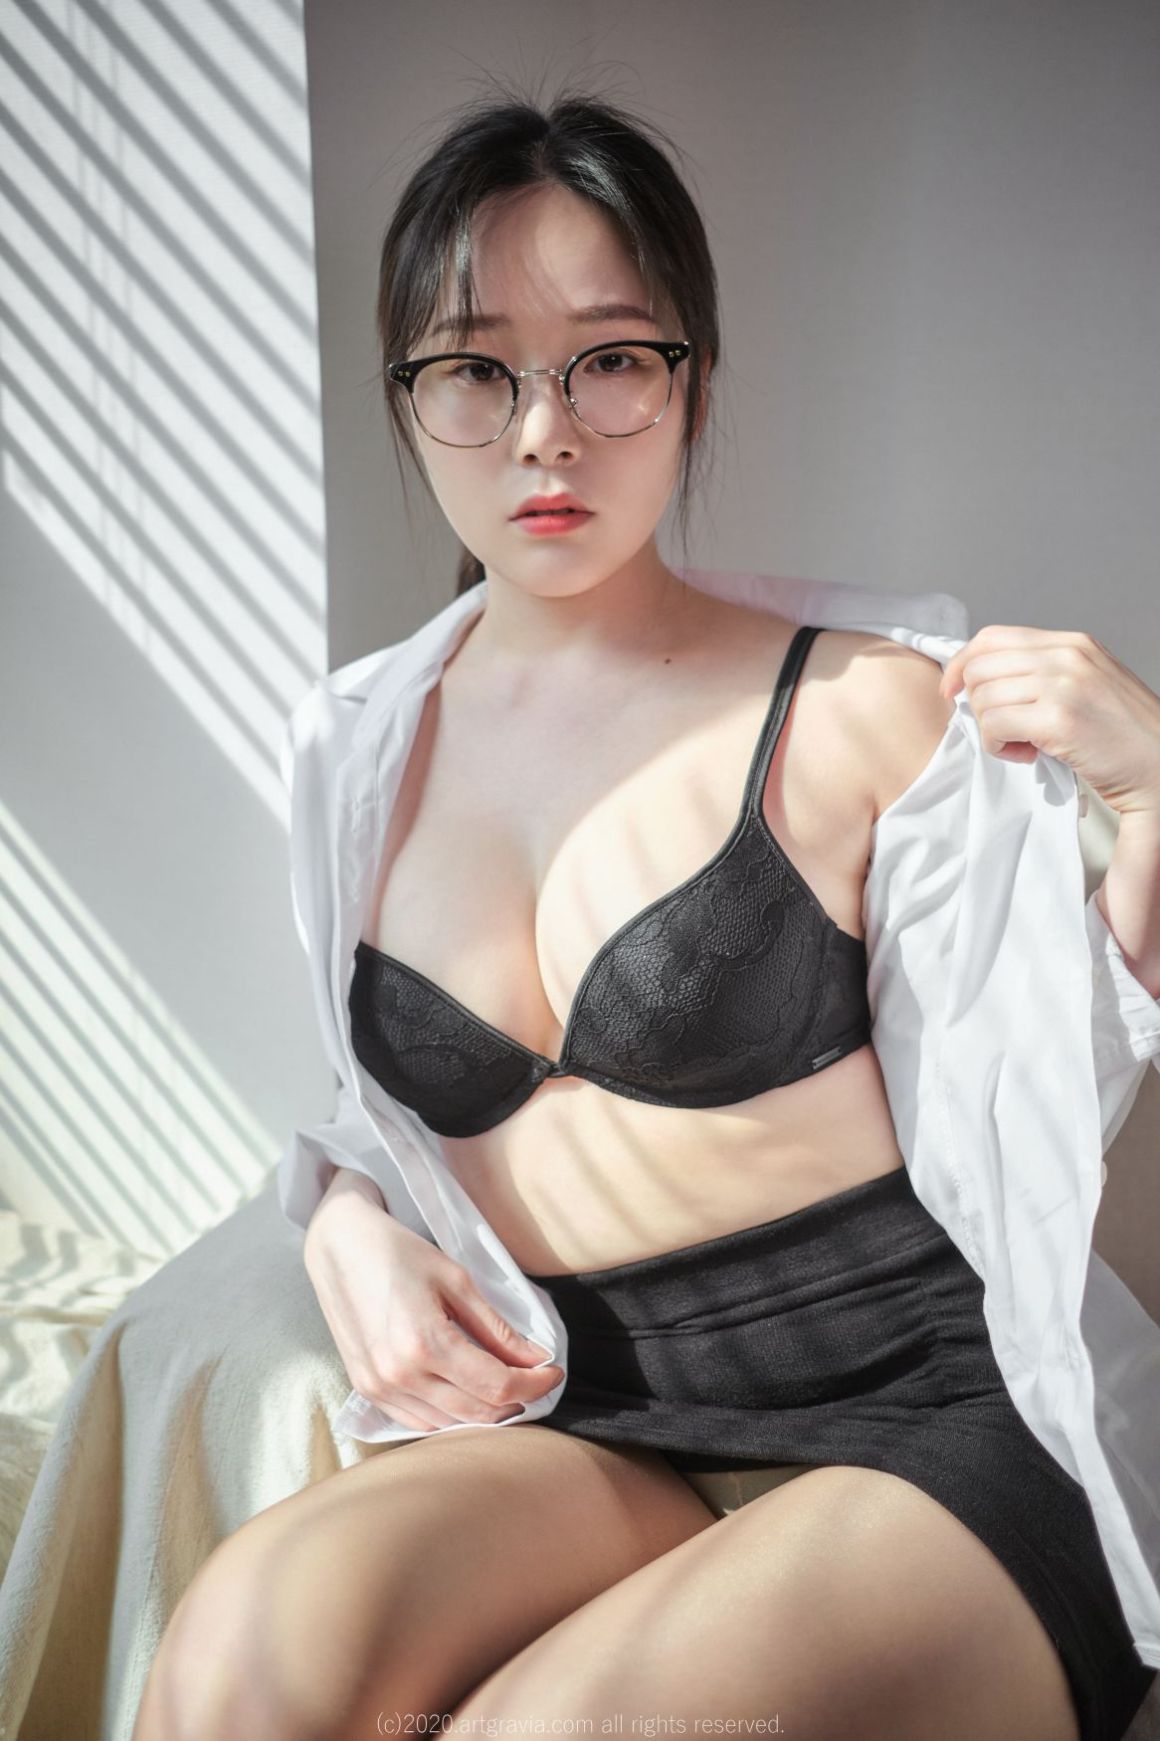 AsianOnlyfans.com 50 186 20211005